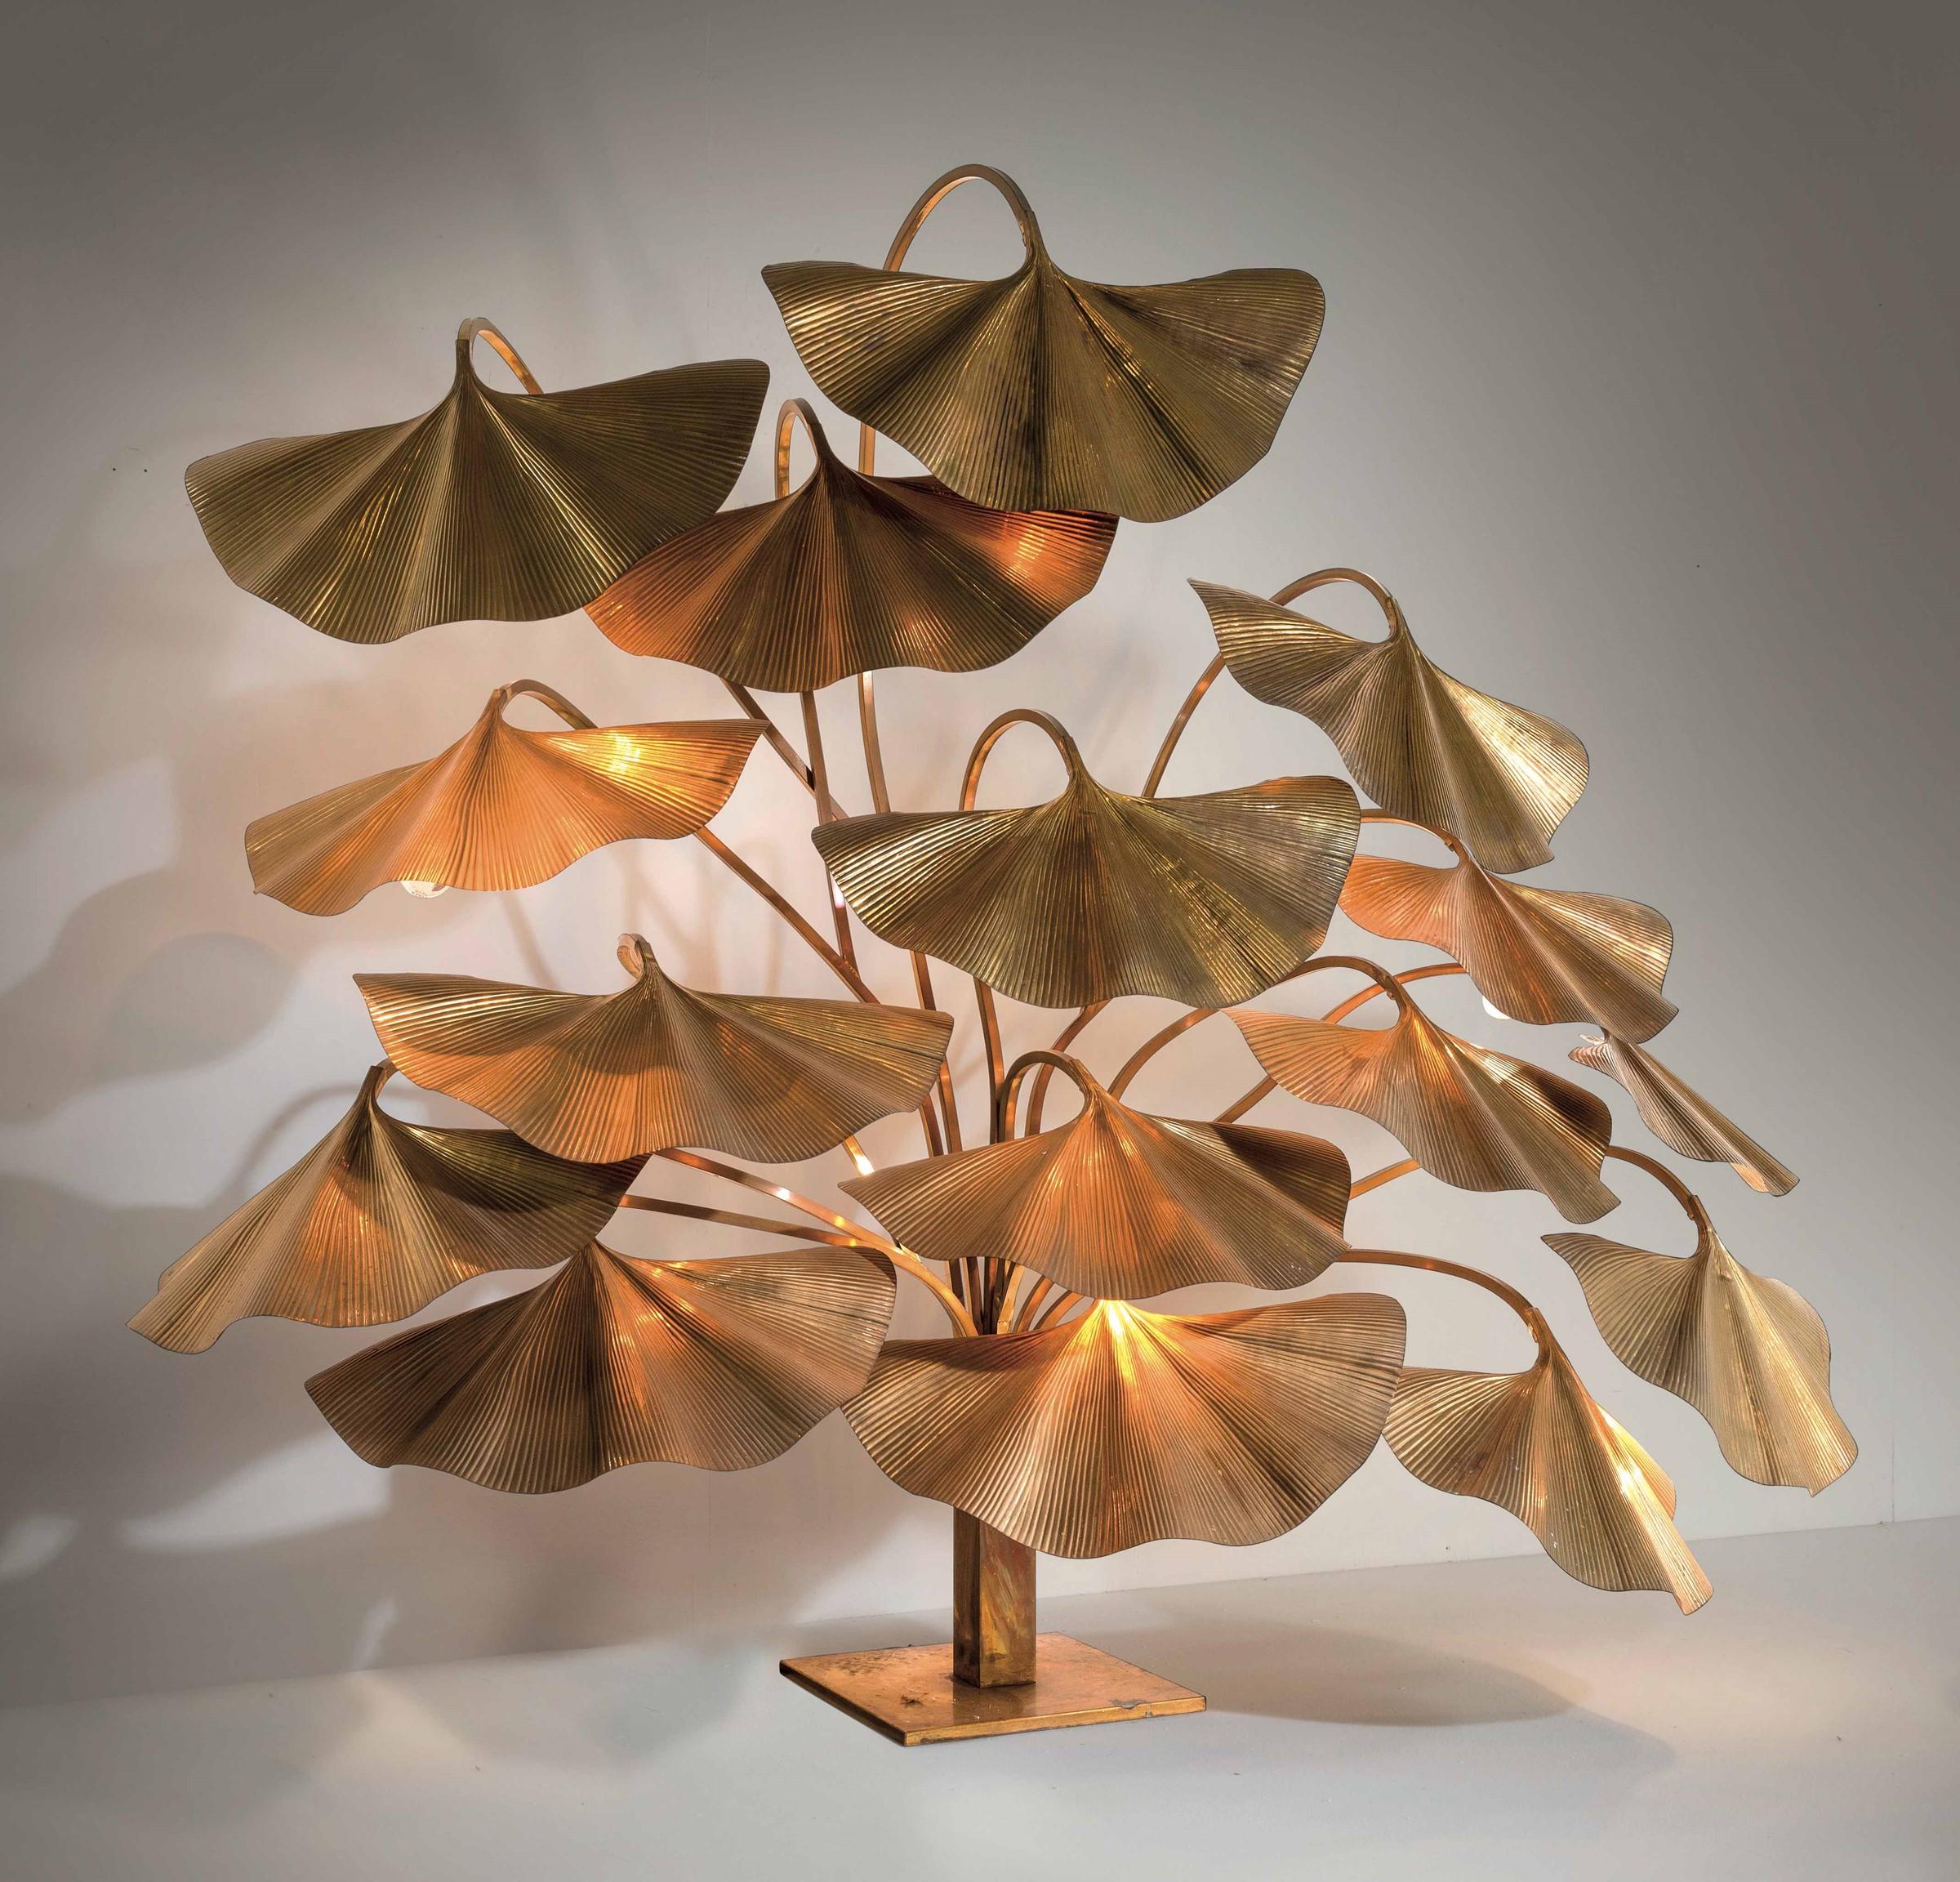 European, Italian, Midcentury Modern, Brass, Floor Light Lamp By Tommaso Barbi.

Tommaso Barbi
Large lamp composed of 16 leaves each with its own light, structure and reflectors are in brass and chiseled brass.

Production Bottega Gadda, Italy,